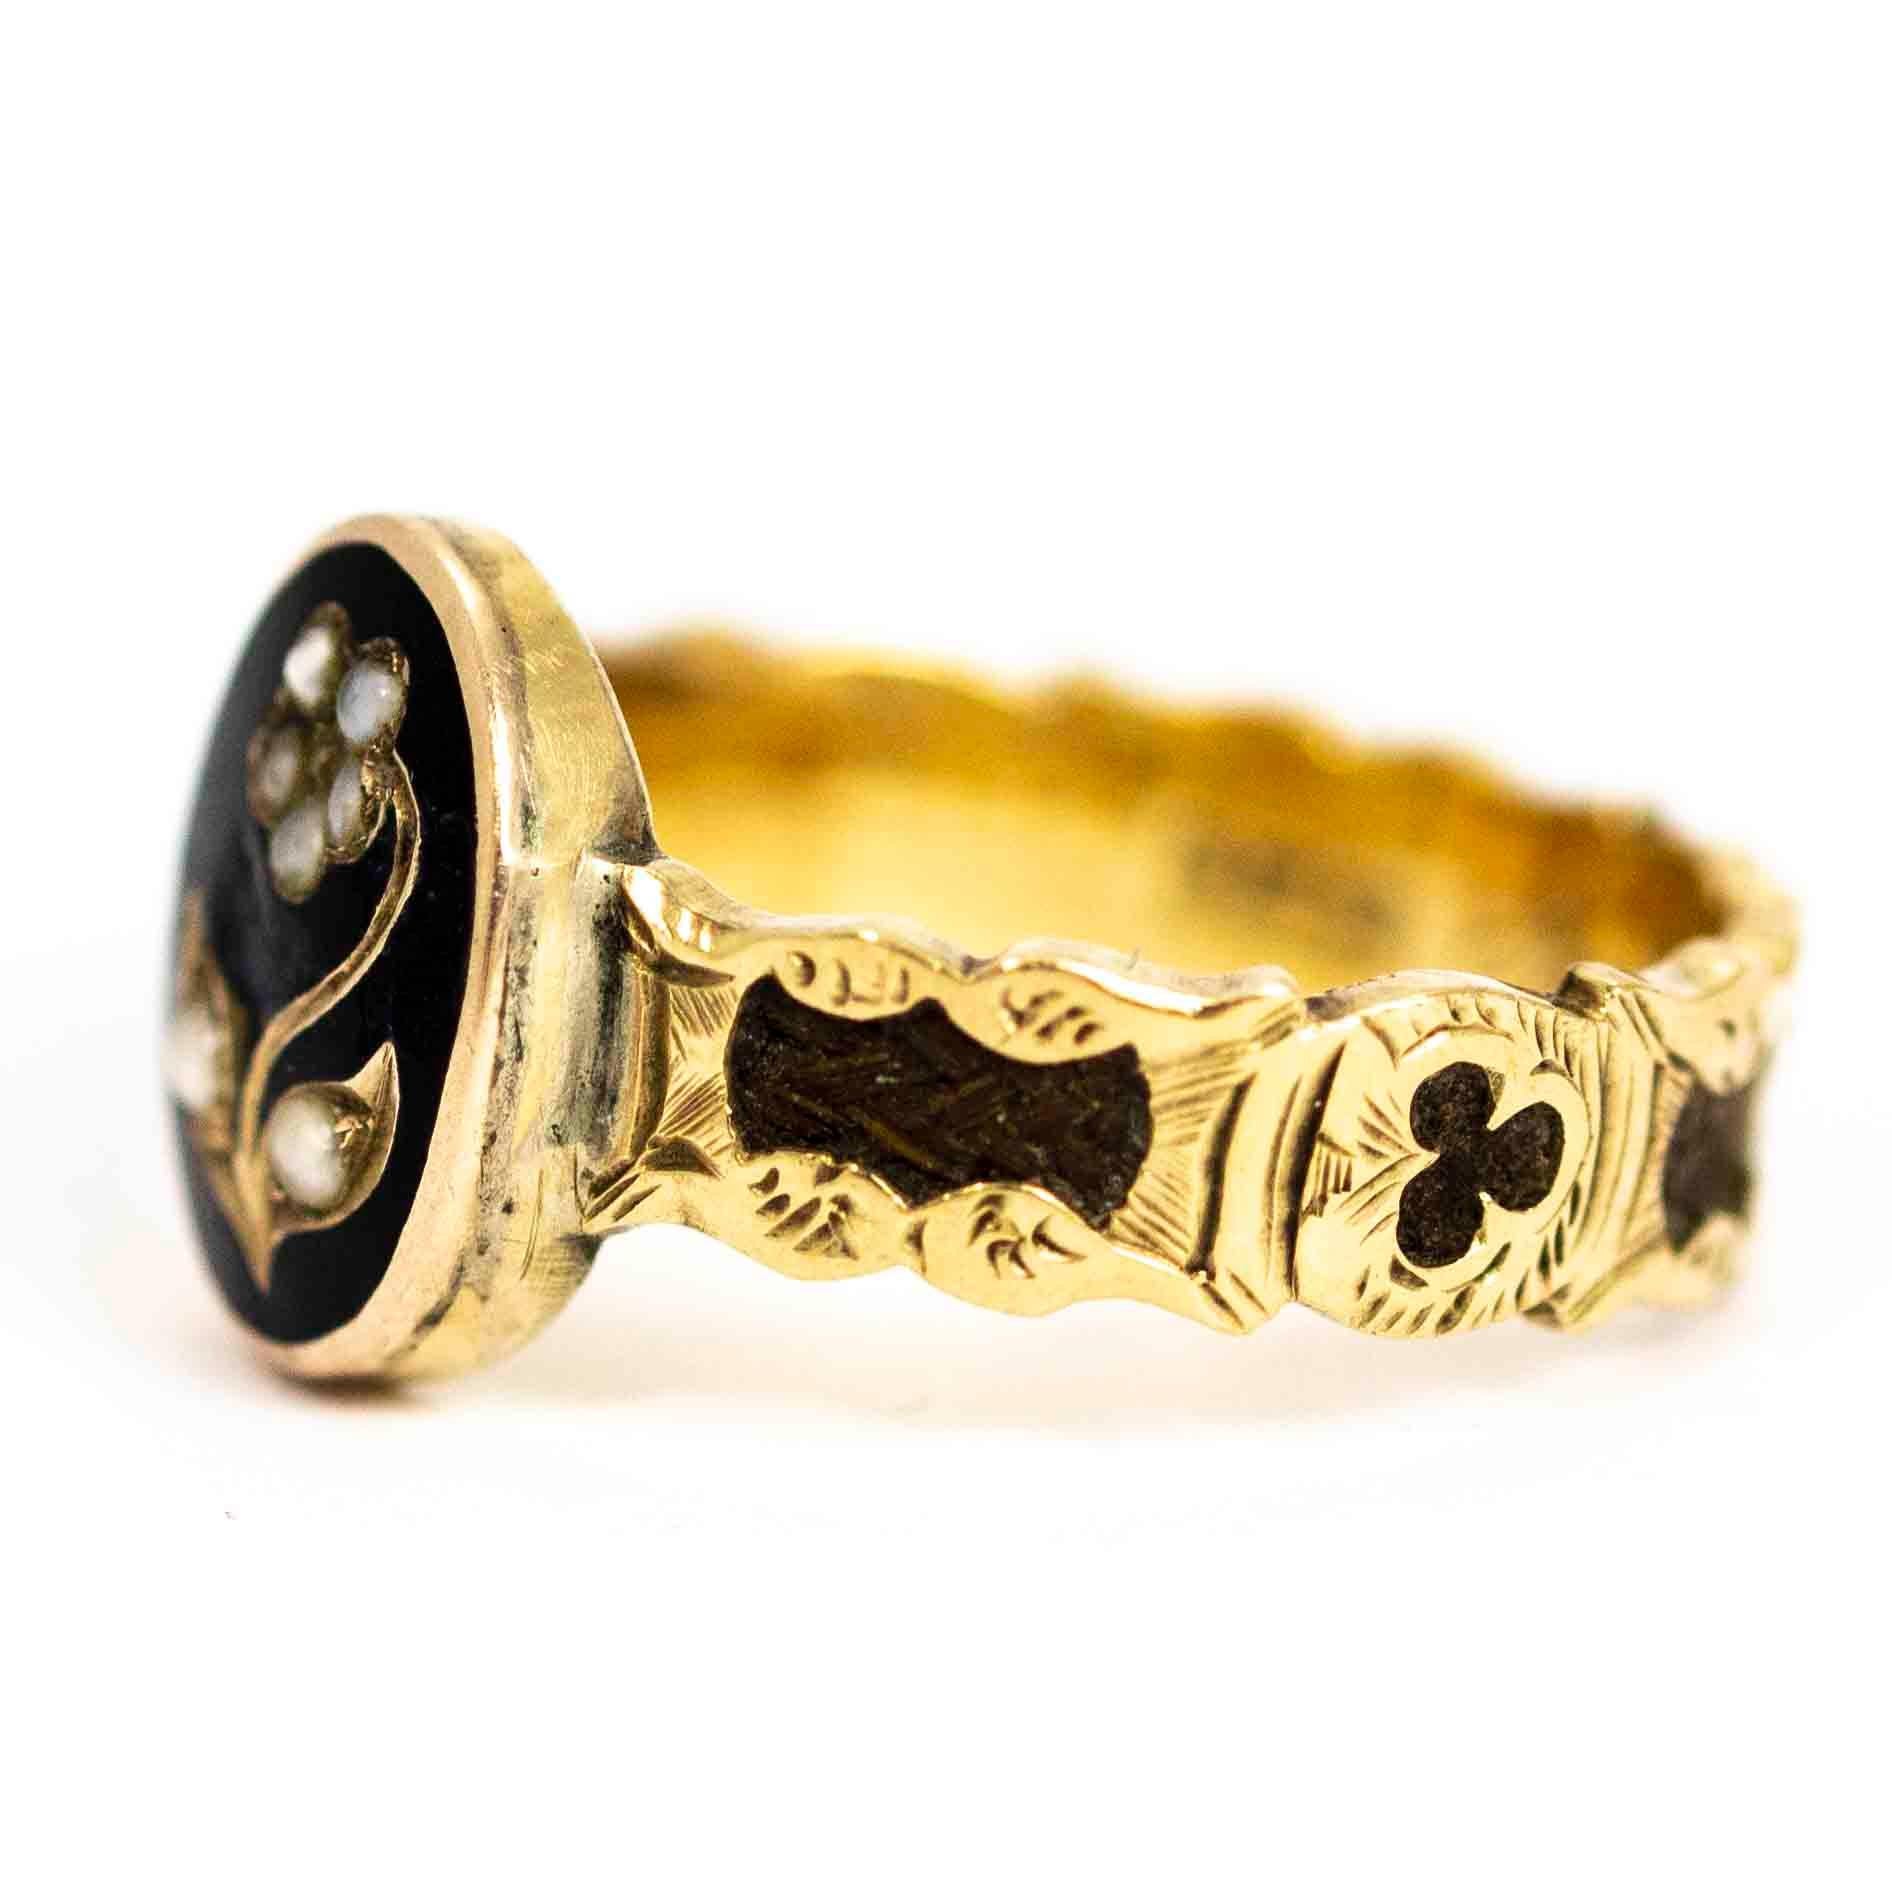 A stunning antique Victorian mourning ring. Fronted with a beautiful forget me not flower motif set with pearls on an oval of black enamel. The band has a beautiful ornate design throughout and is set with woven hair. The inscription on the inside